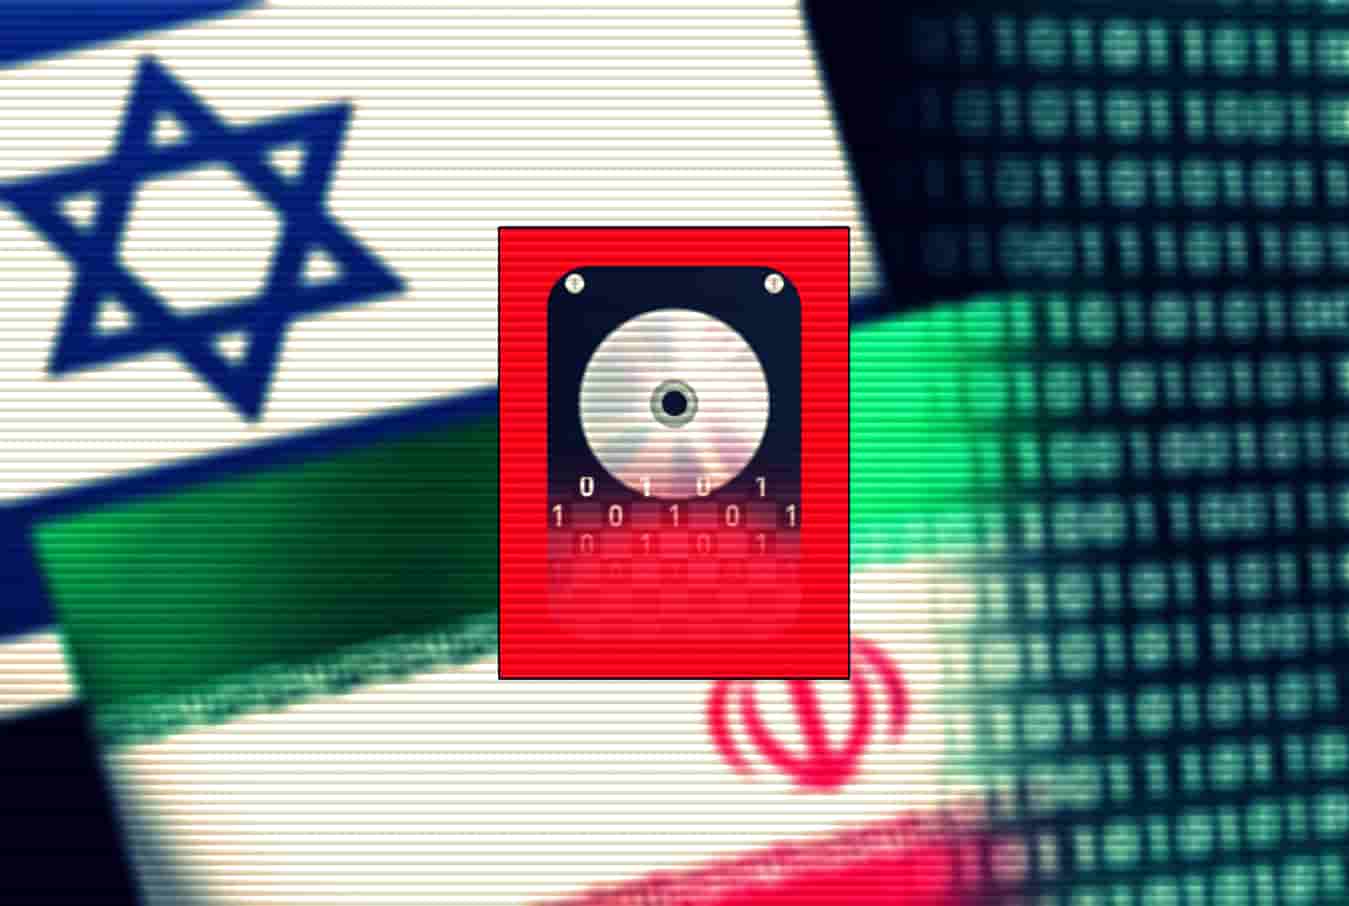 Iranian hackers hit Israel with disk wiper in disguise of ransomware